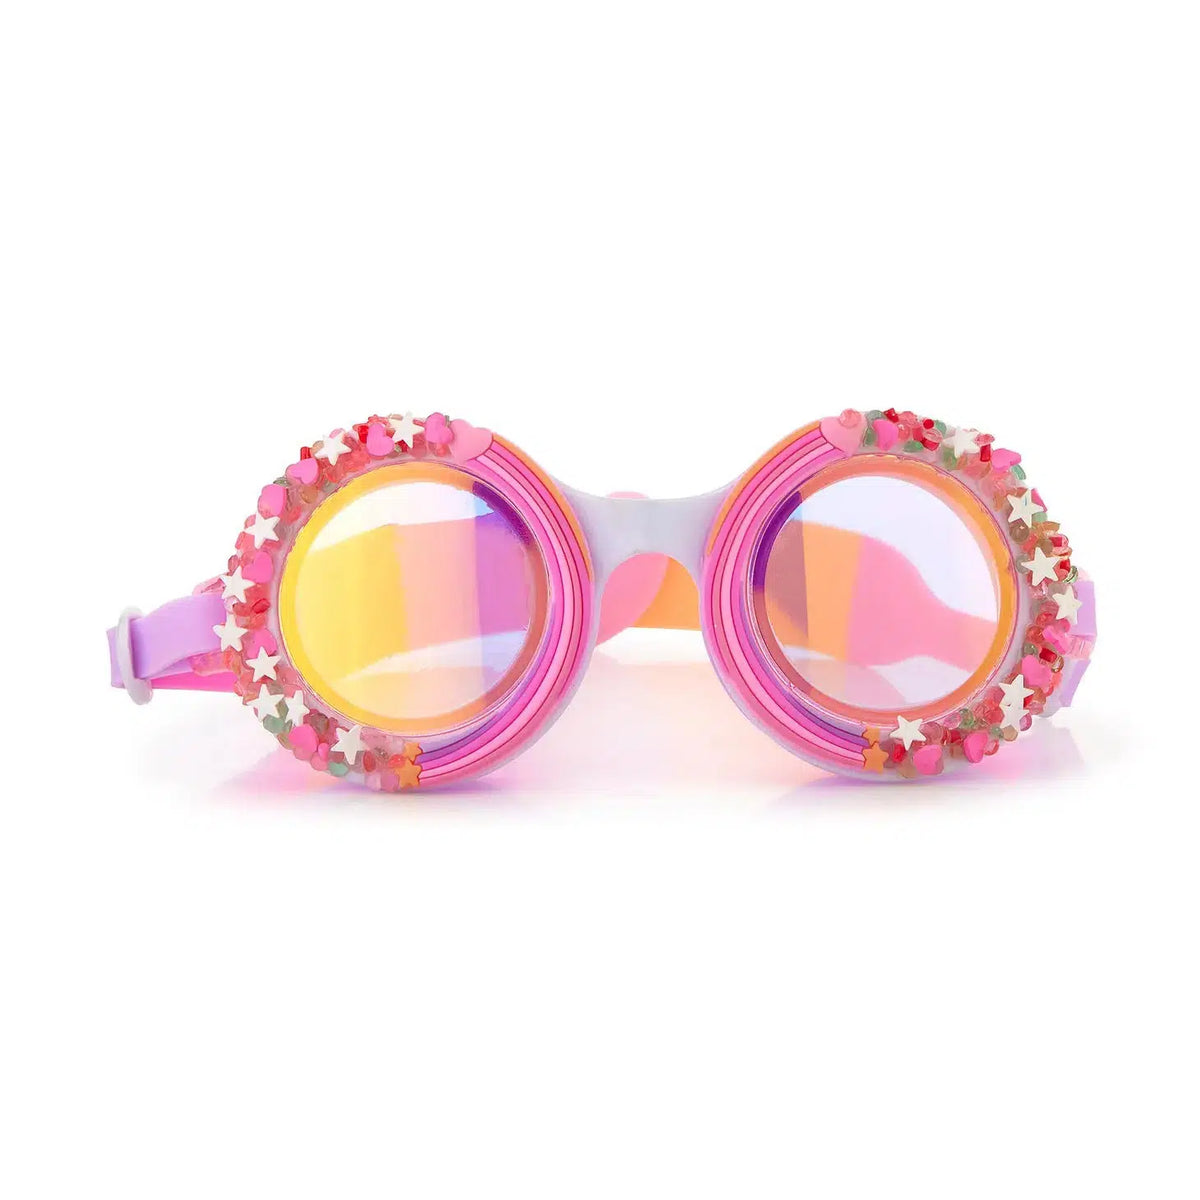 Front view of the Cupcake Swim Goggle-Pink Berry.